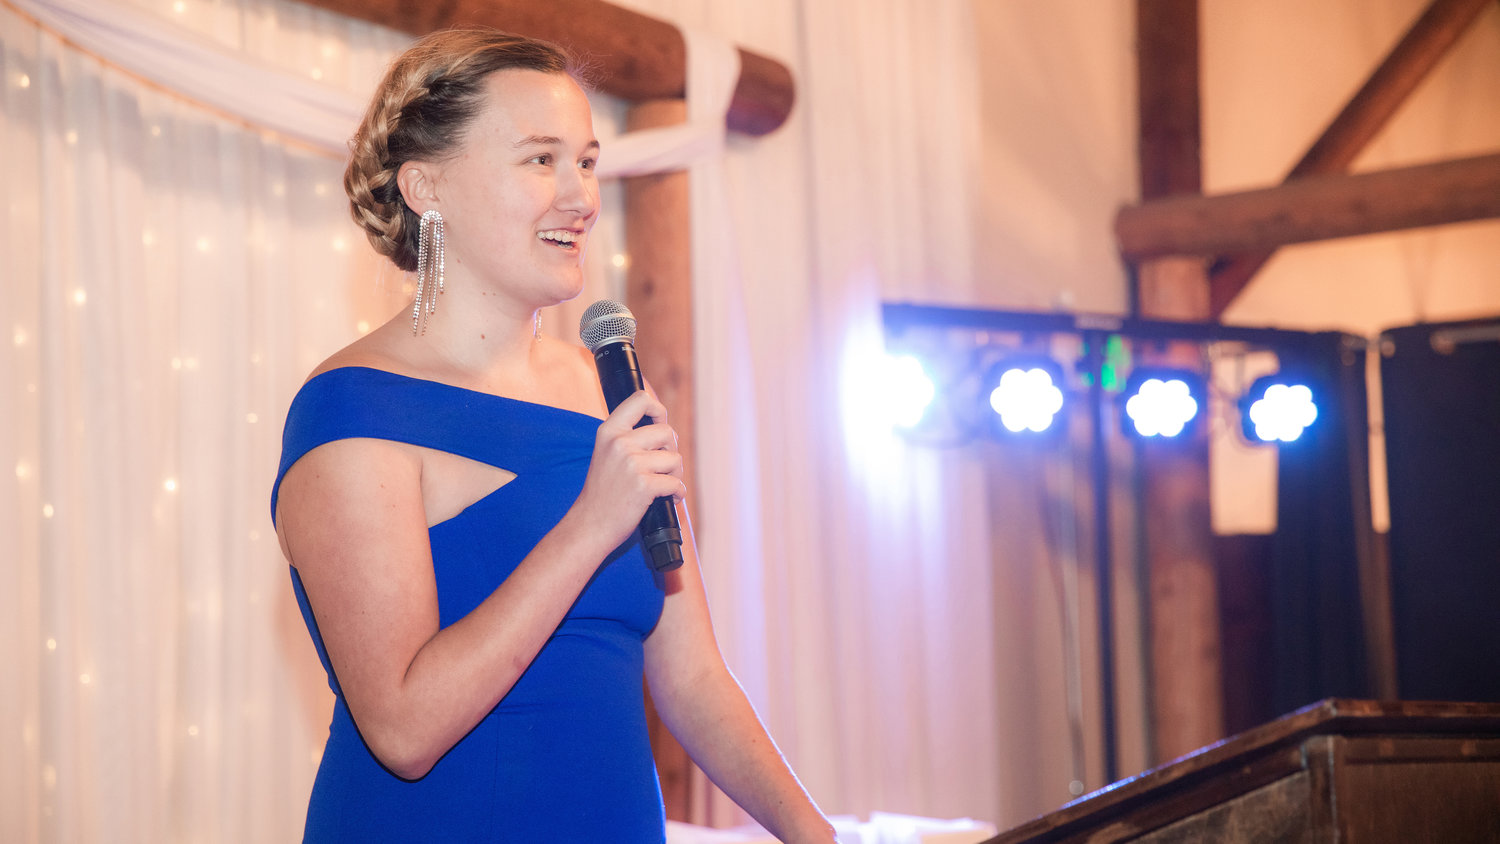 The Yelm Chamber of Commerce introduced Madison Cahoon as the new executive director during the Best of Nisqually Gala in Roy on Thursday.